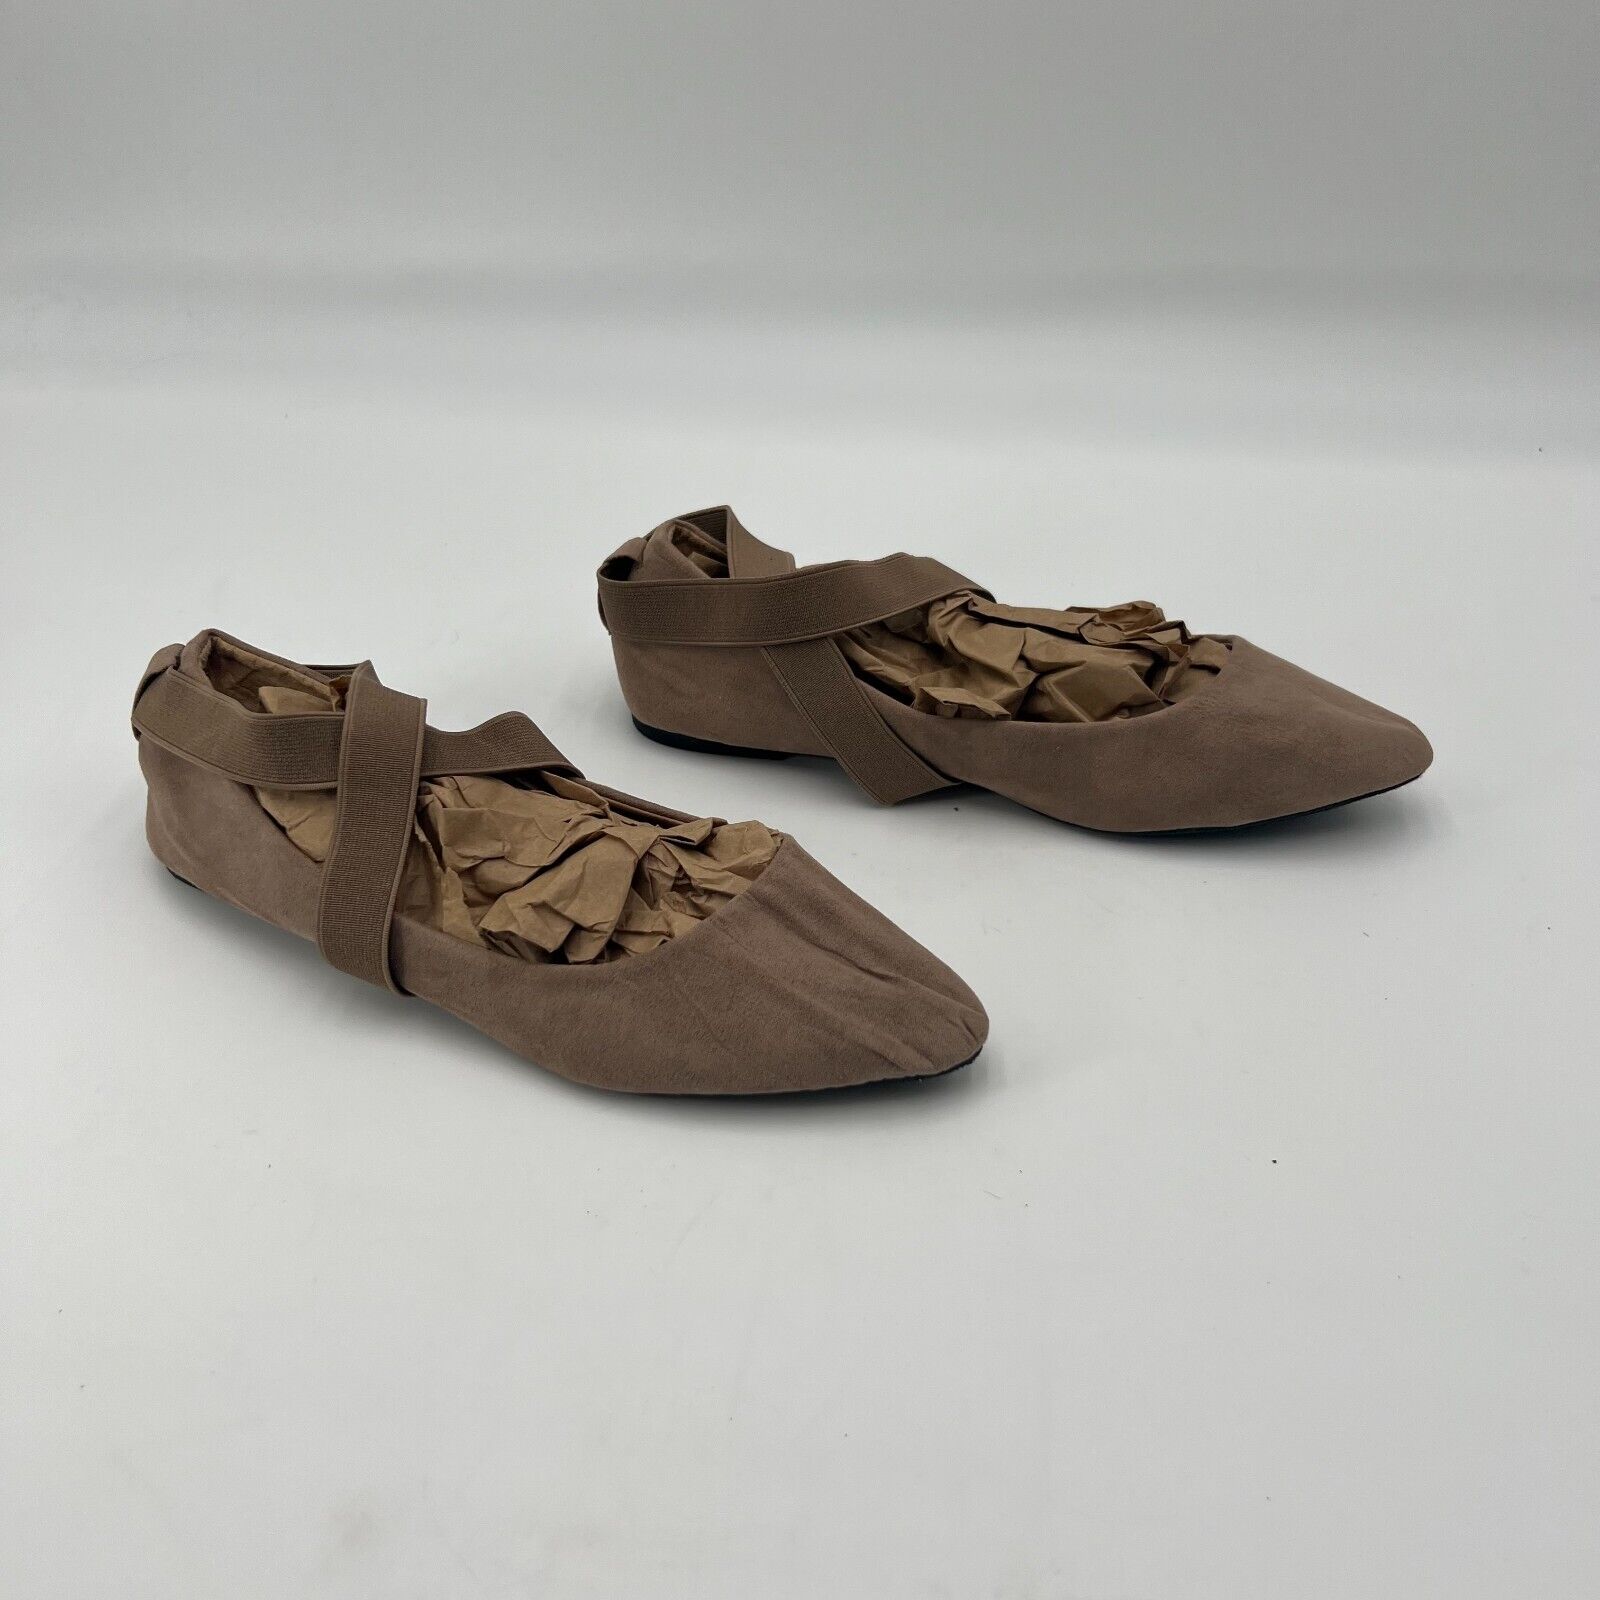 Charles Albert Ballet Style Sandle Flats Elastic Straps Brown Suede Womens Size